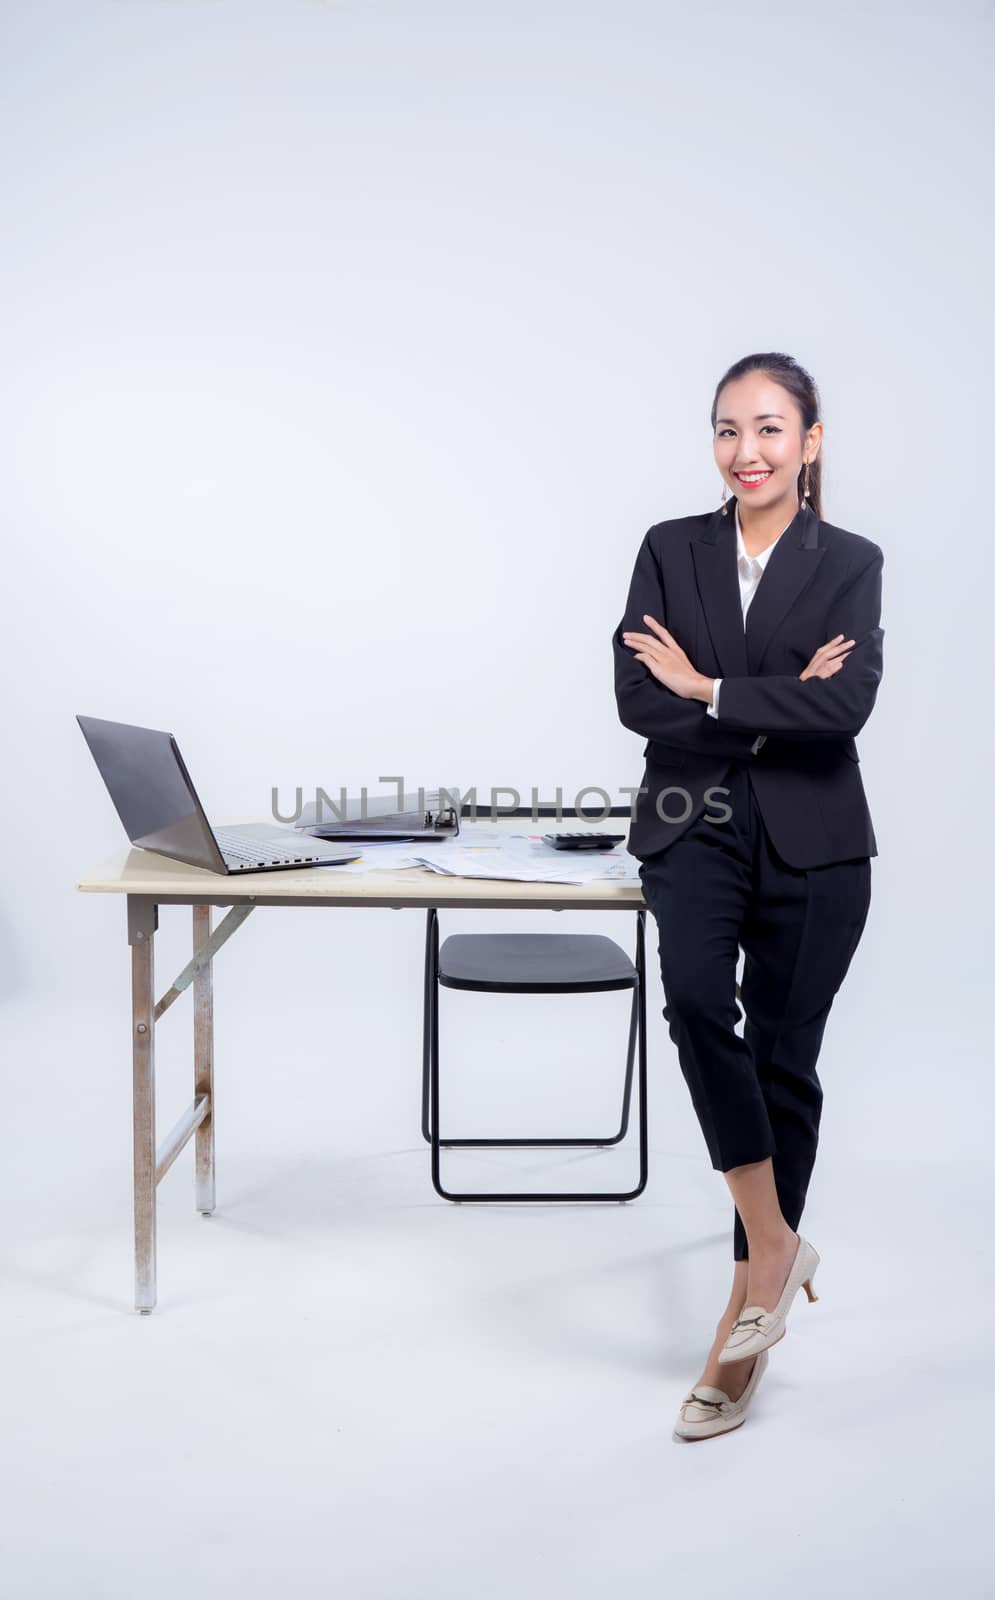 Confident businesswoman in office smiling at the camera with folded arms in office.